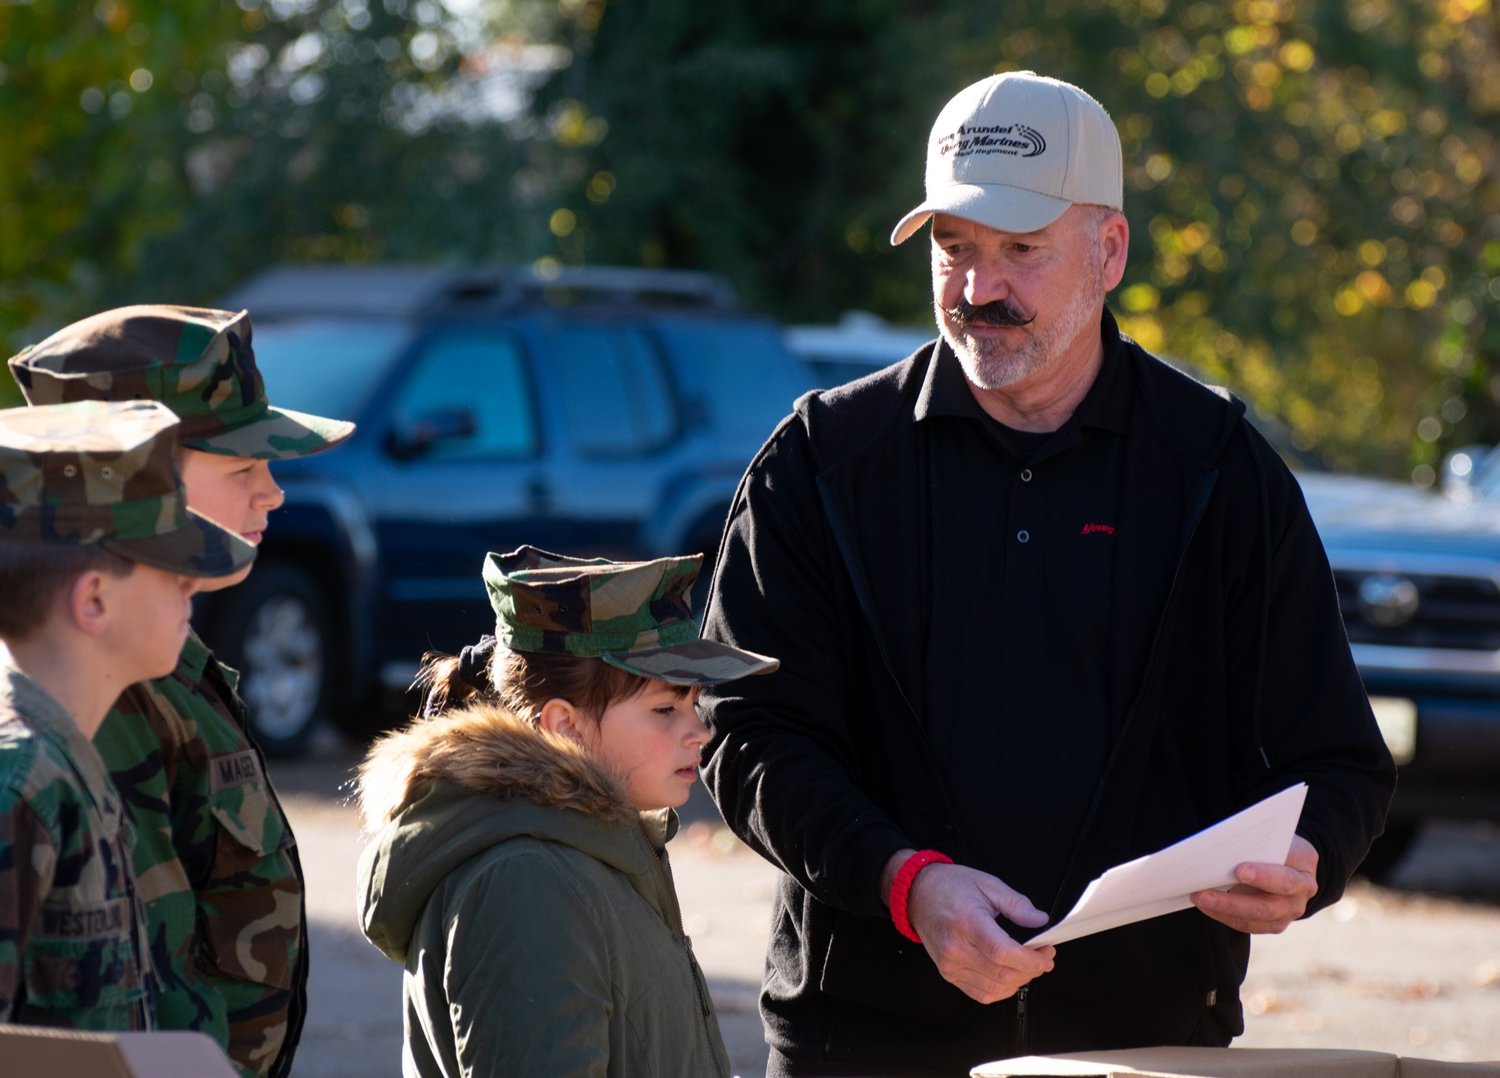 Ray Sturm gave directions to several members of the Young Marines organization during a recent event. Sturm serves as the commander of the Anne Arundel Young Marines.